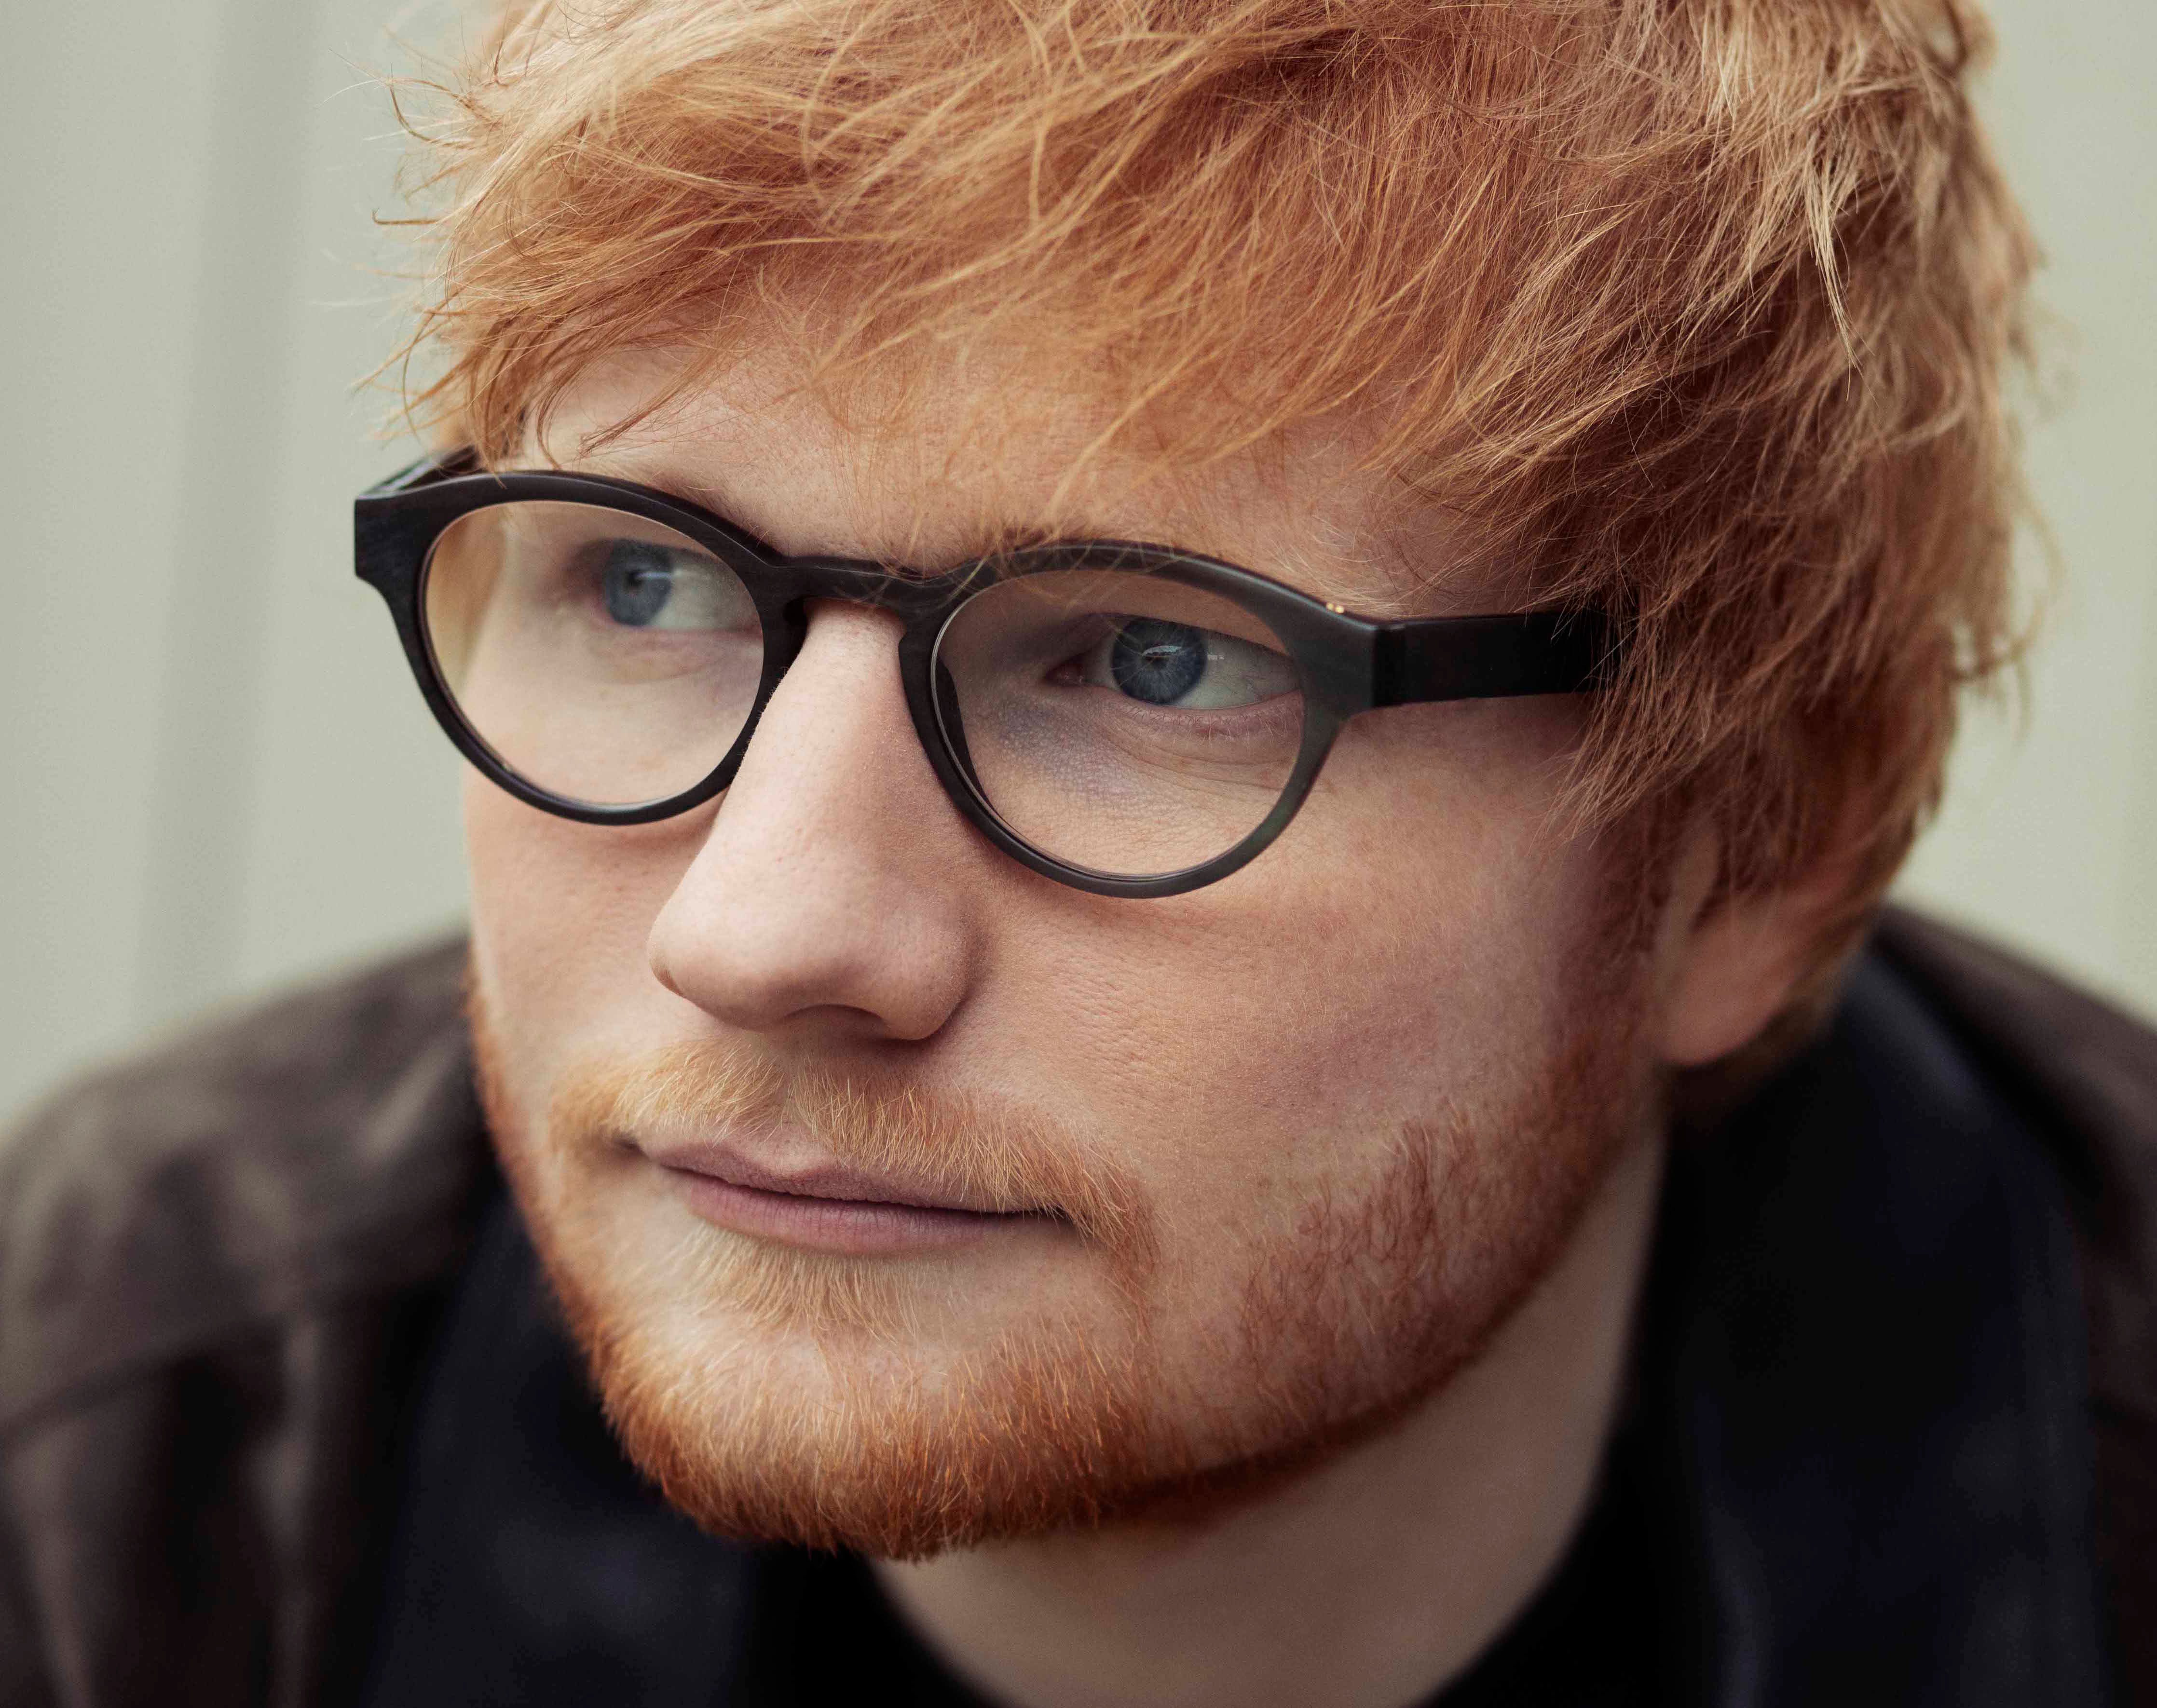 Ed Sheeran To Release ‘No.6 Collaborations Project’ Album in July